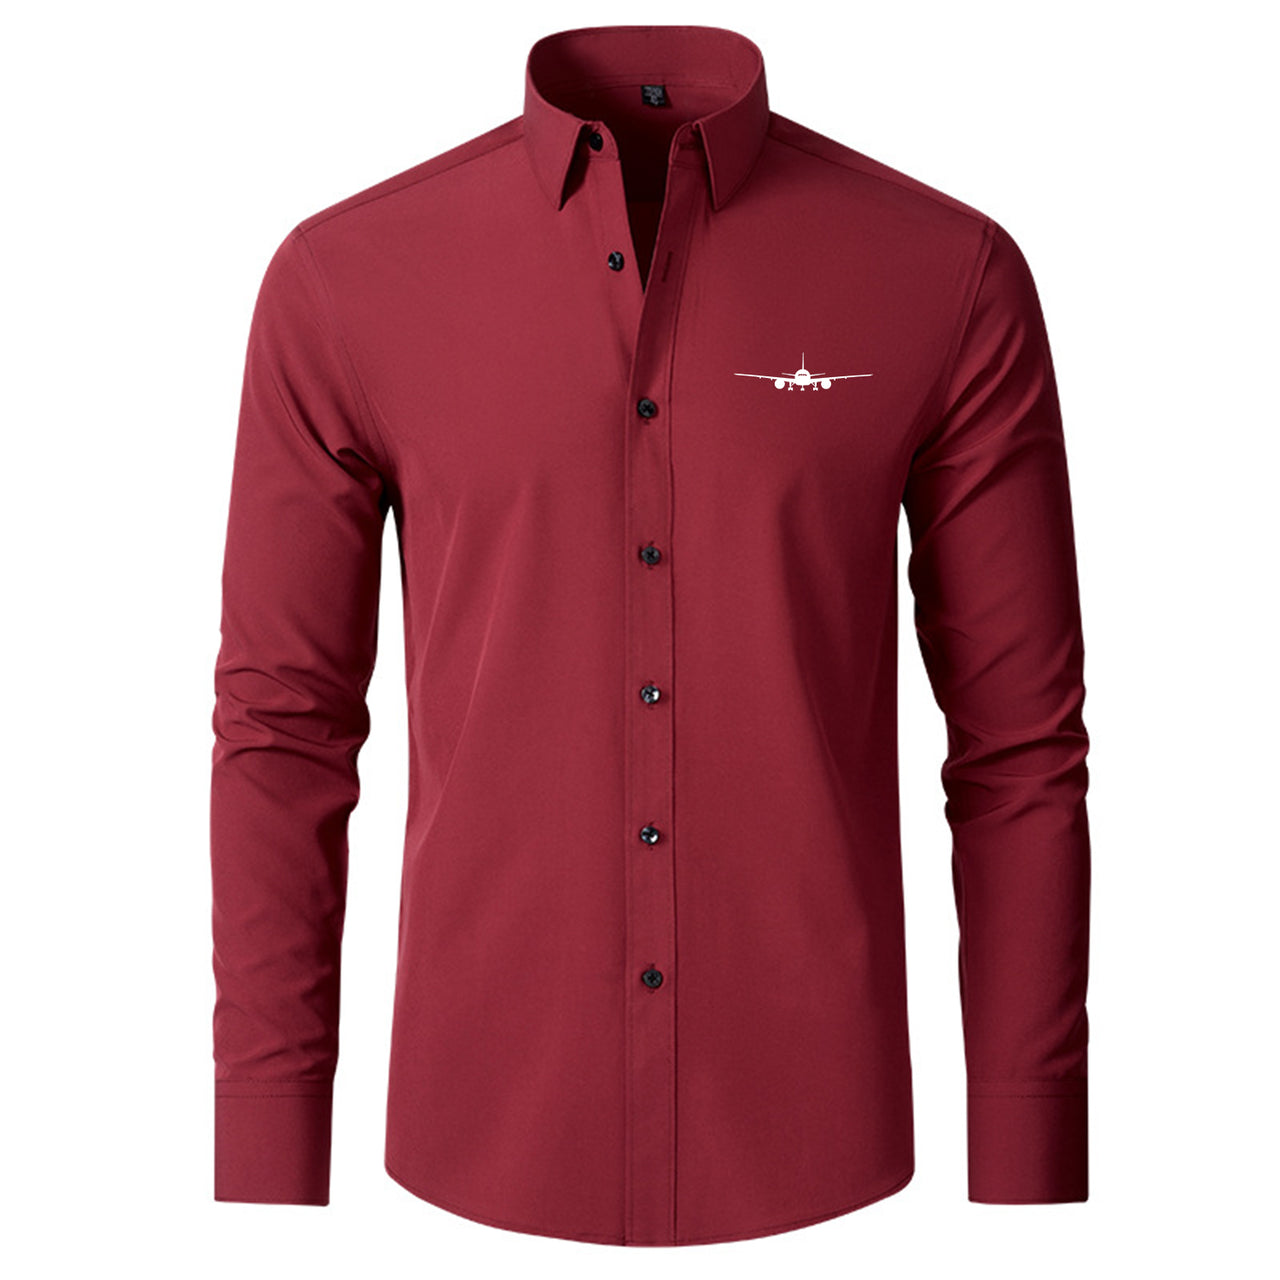 Boeing 777 Silhouette Designed Long Sleeve Shirts